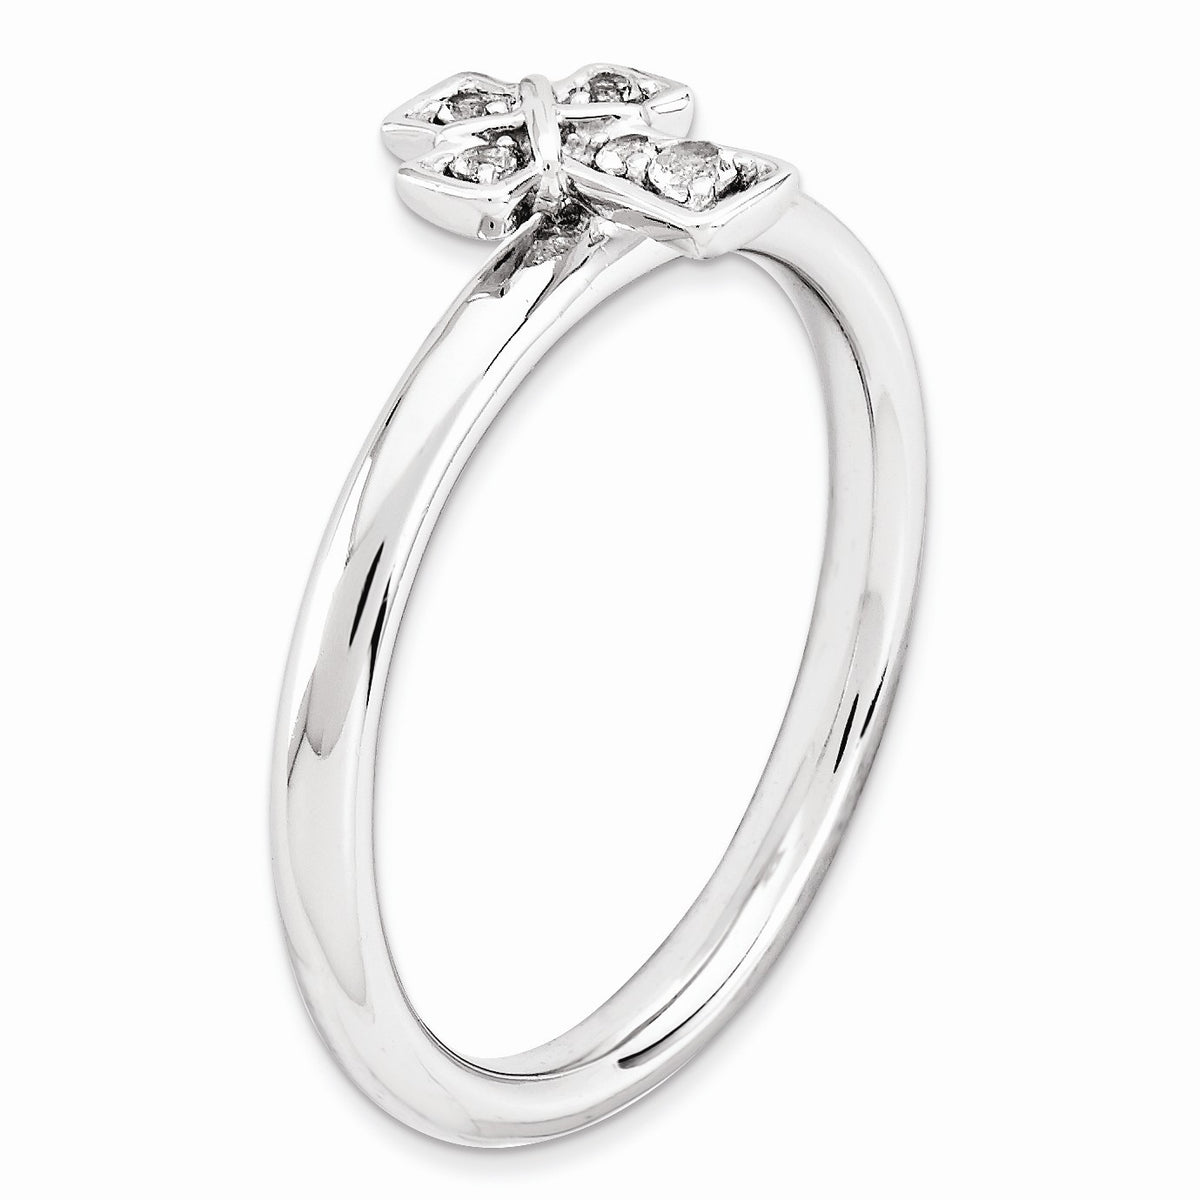 Alternate view of the Rhodium Plated Sterling Silver Stackable White Topaz 9mm Cross Ring by The Black Bow Jewelry Co.